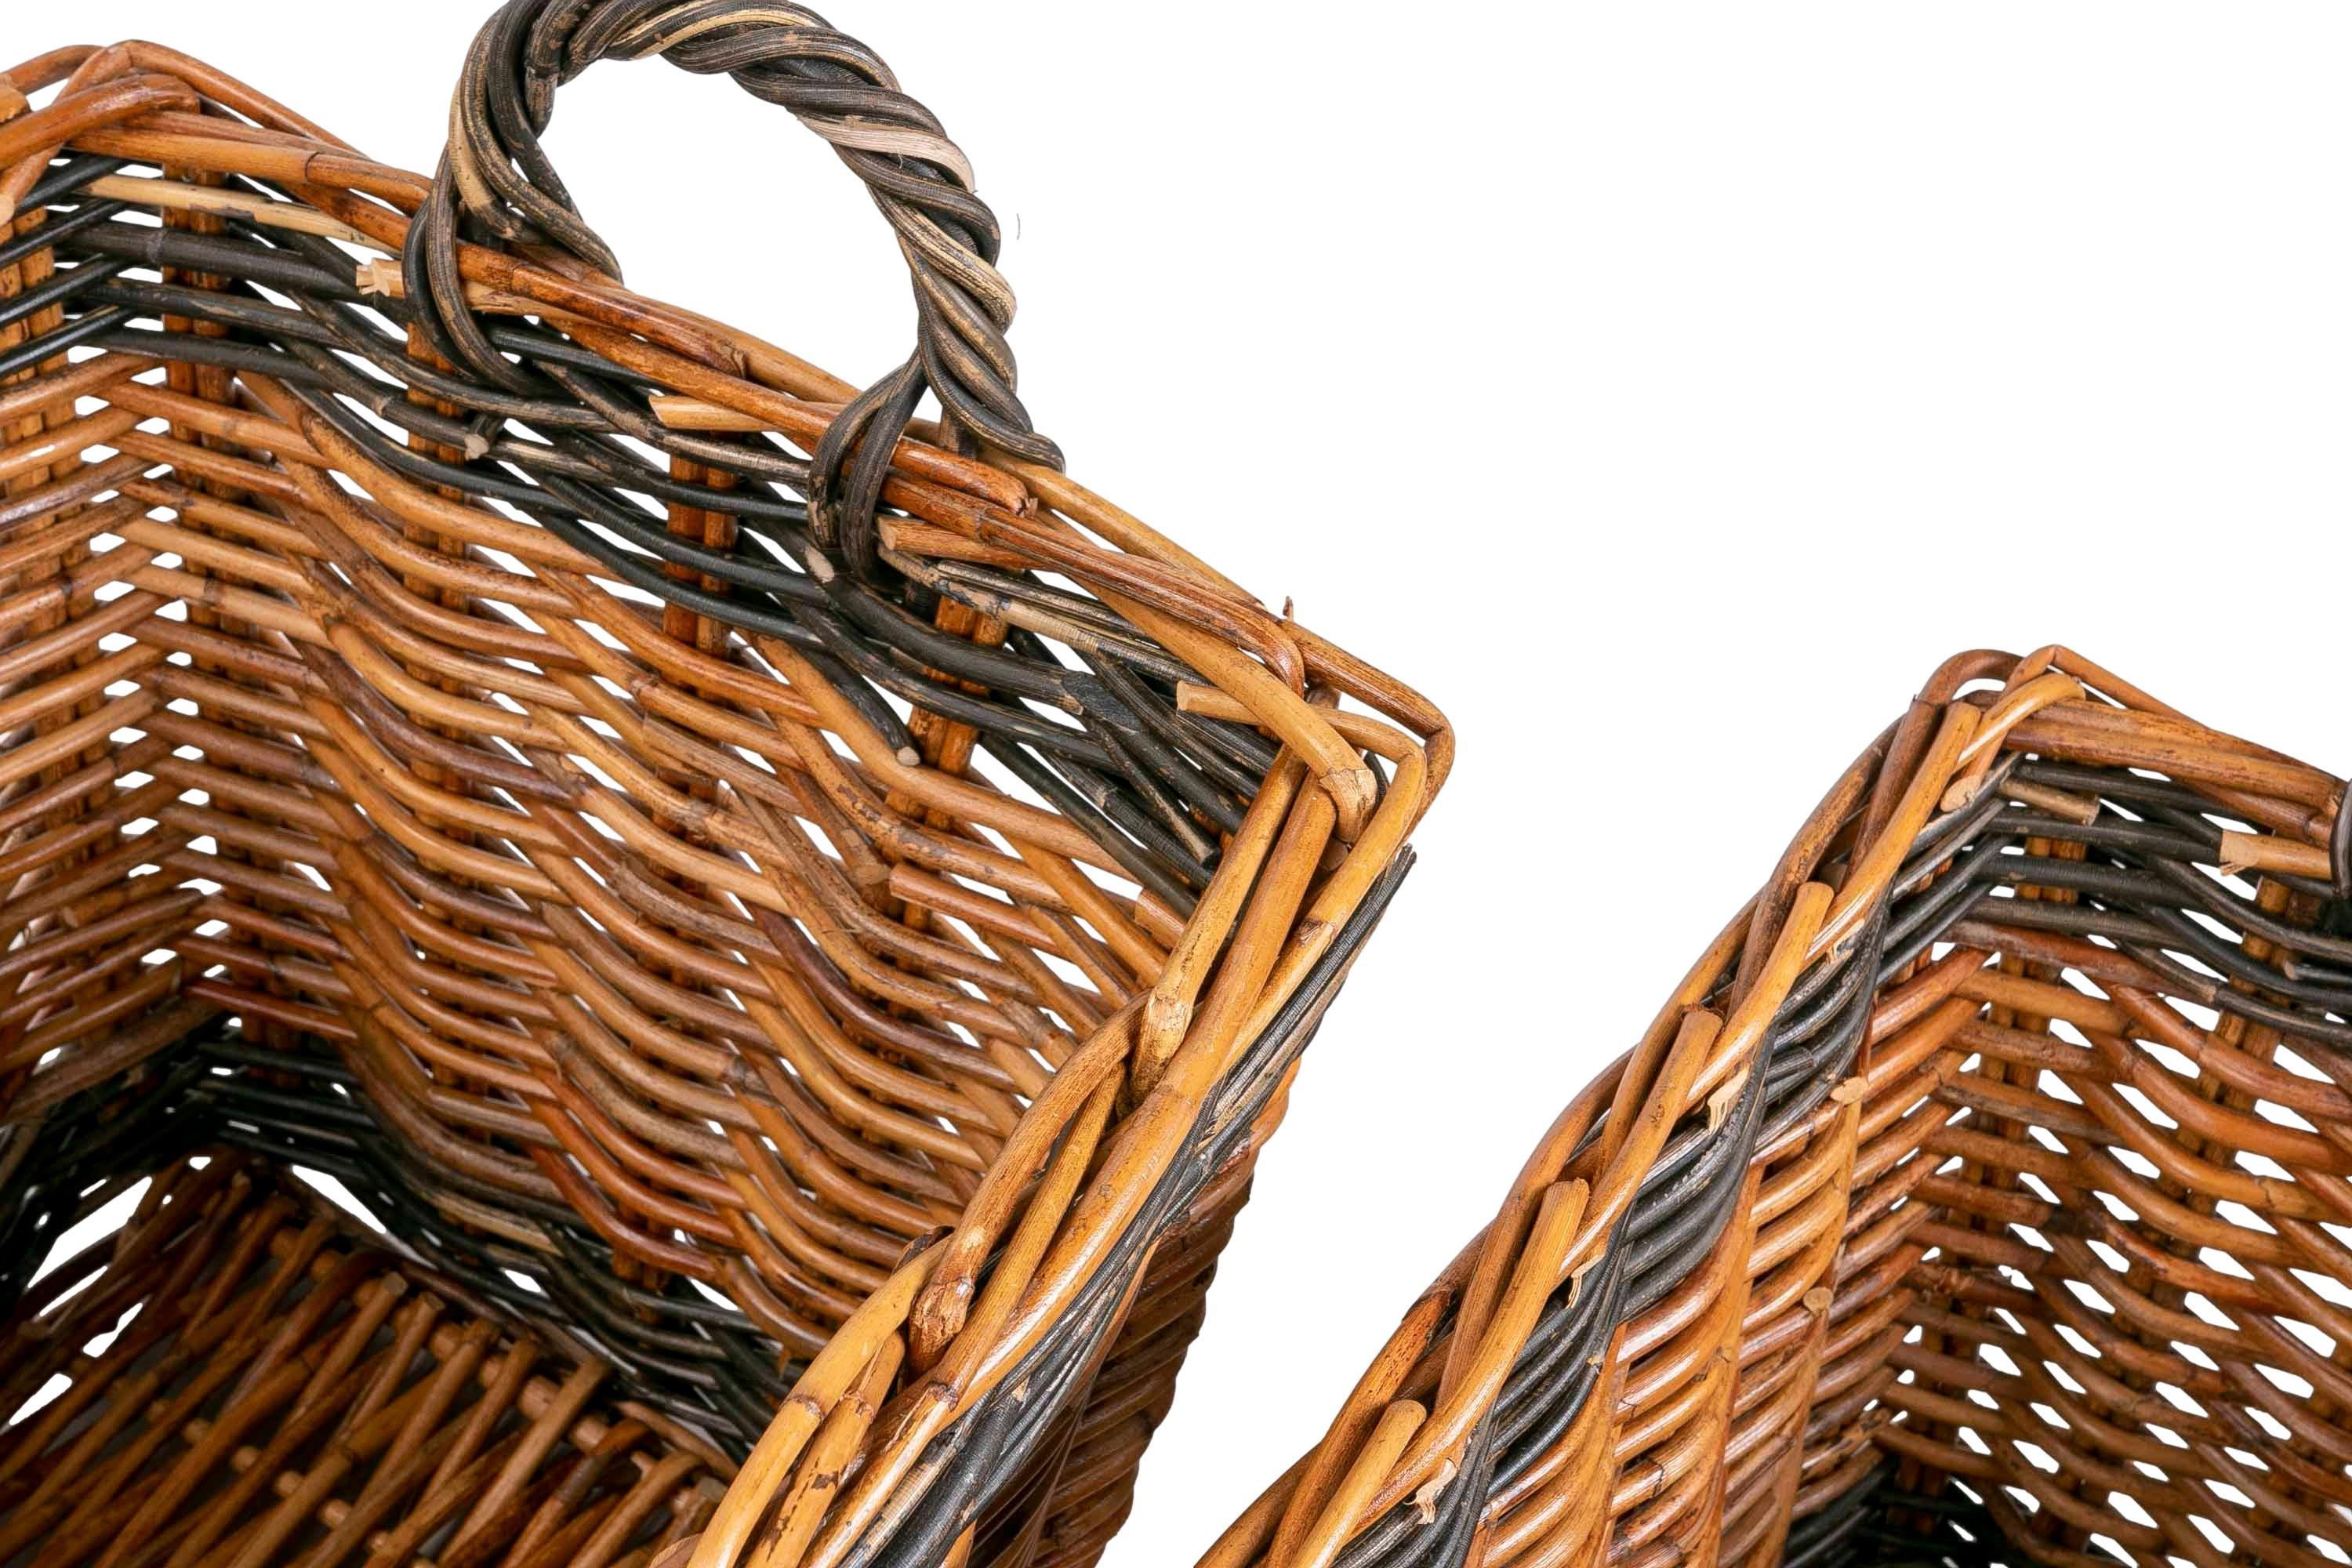 Set Consisting of Three Decorative Wicker Baskets of Different Sizes For Sale 6